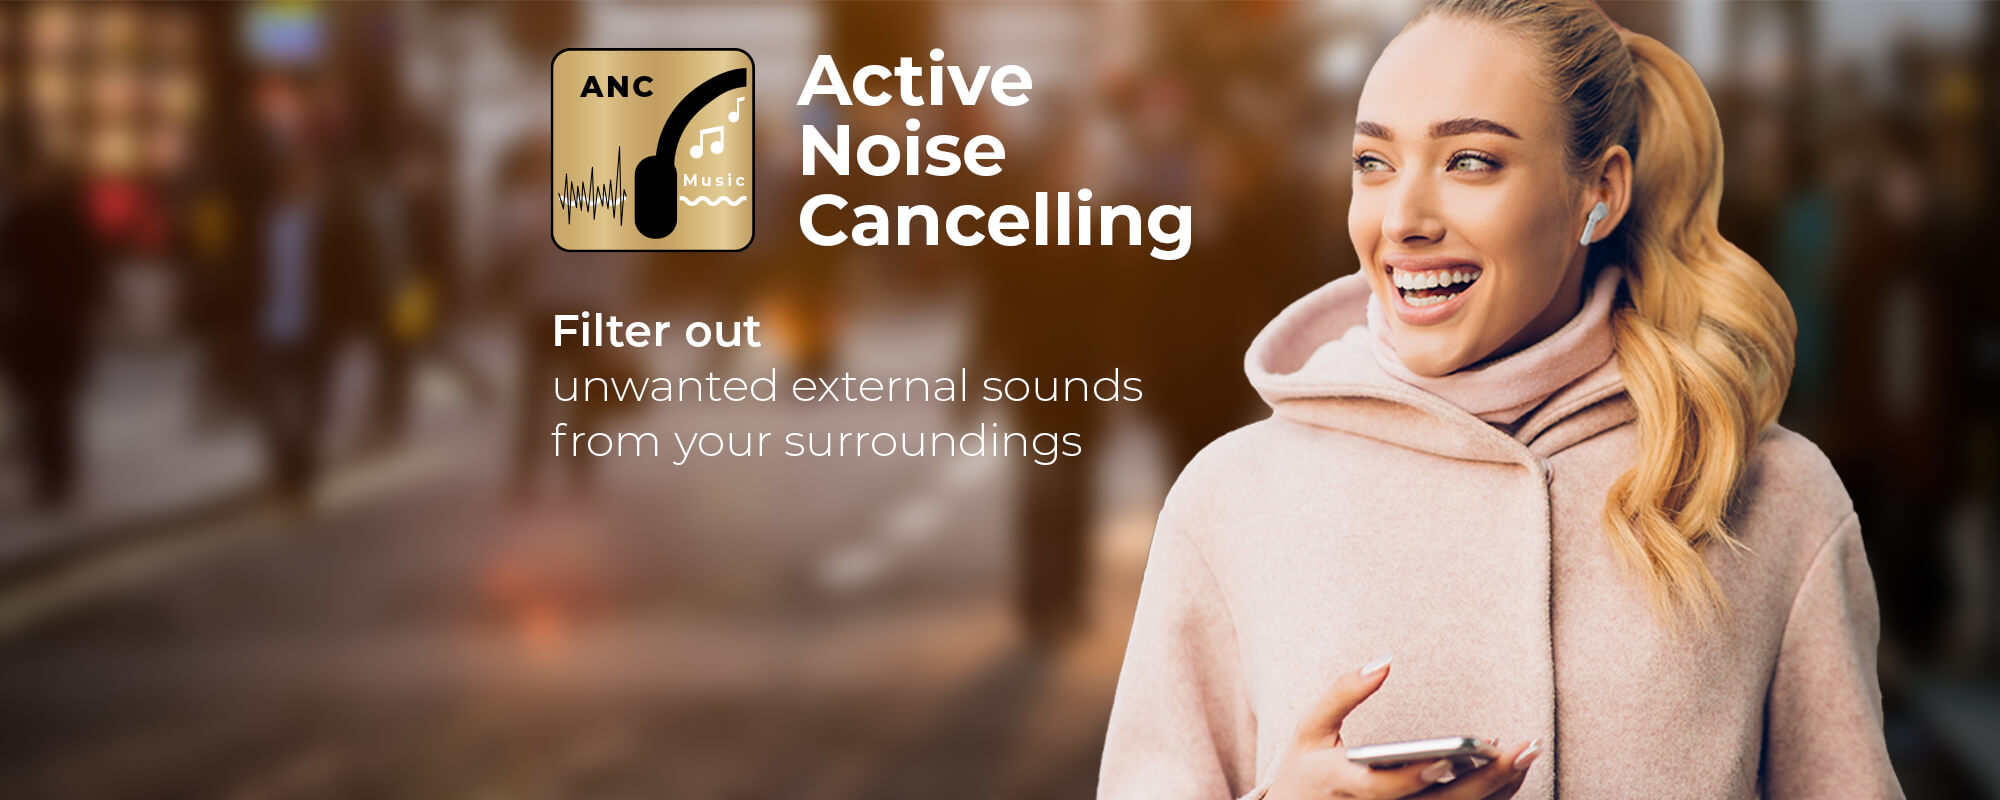 Hybrid Active Noise Cancelling